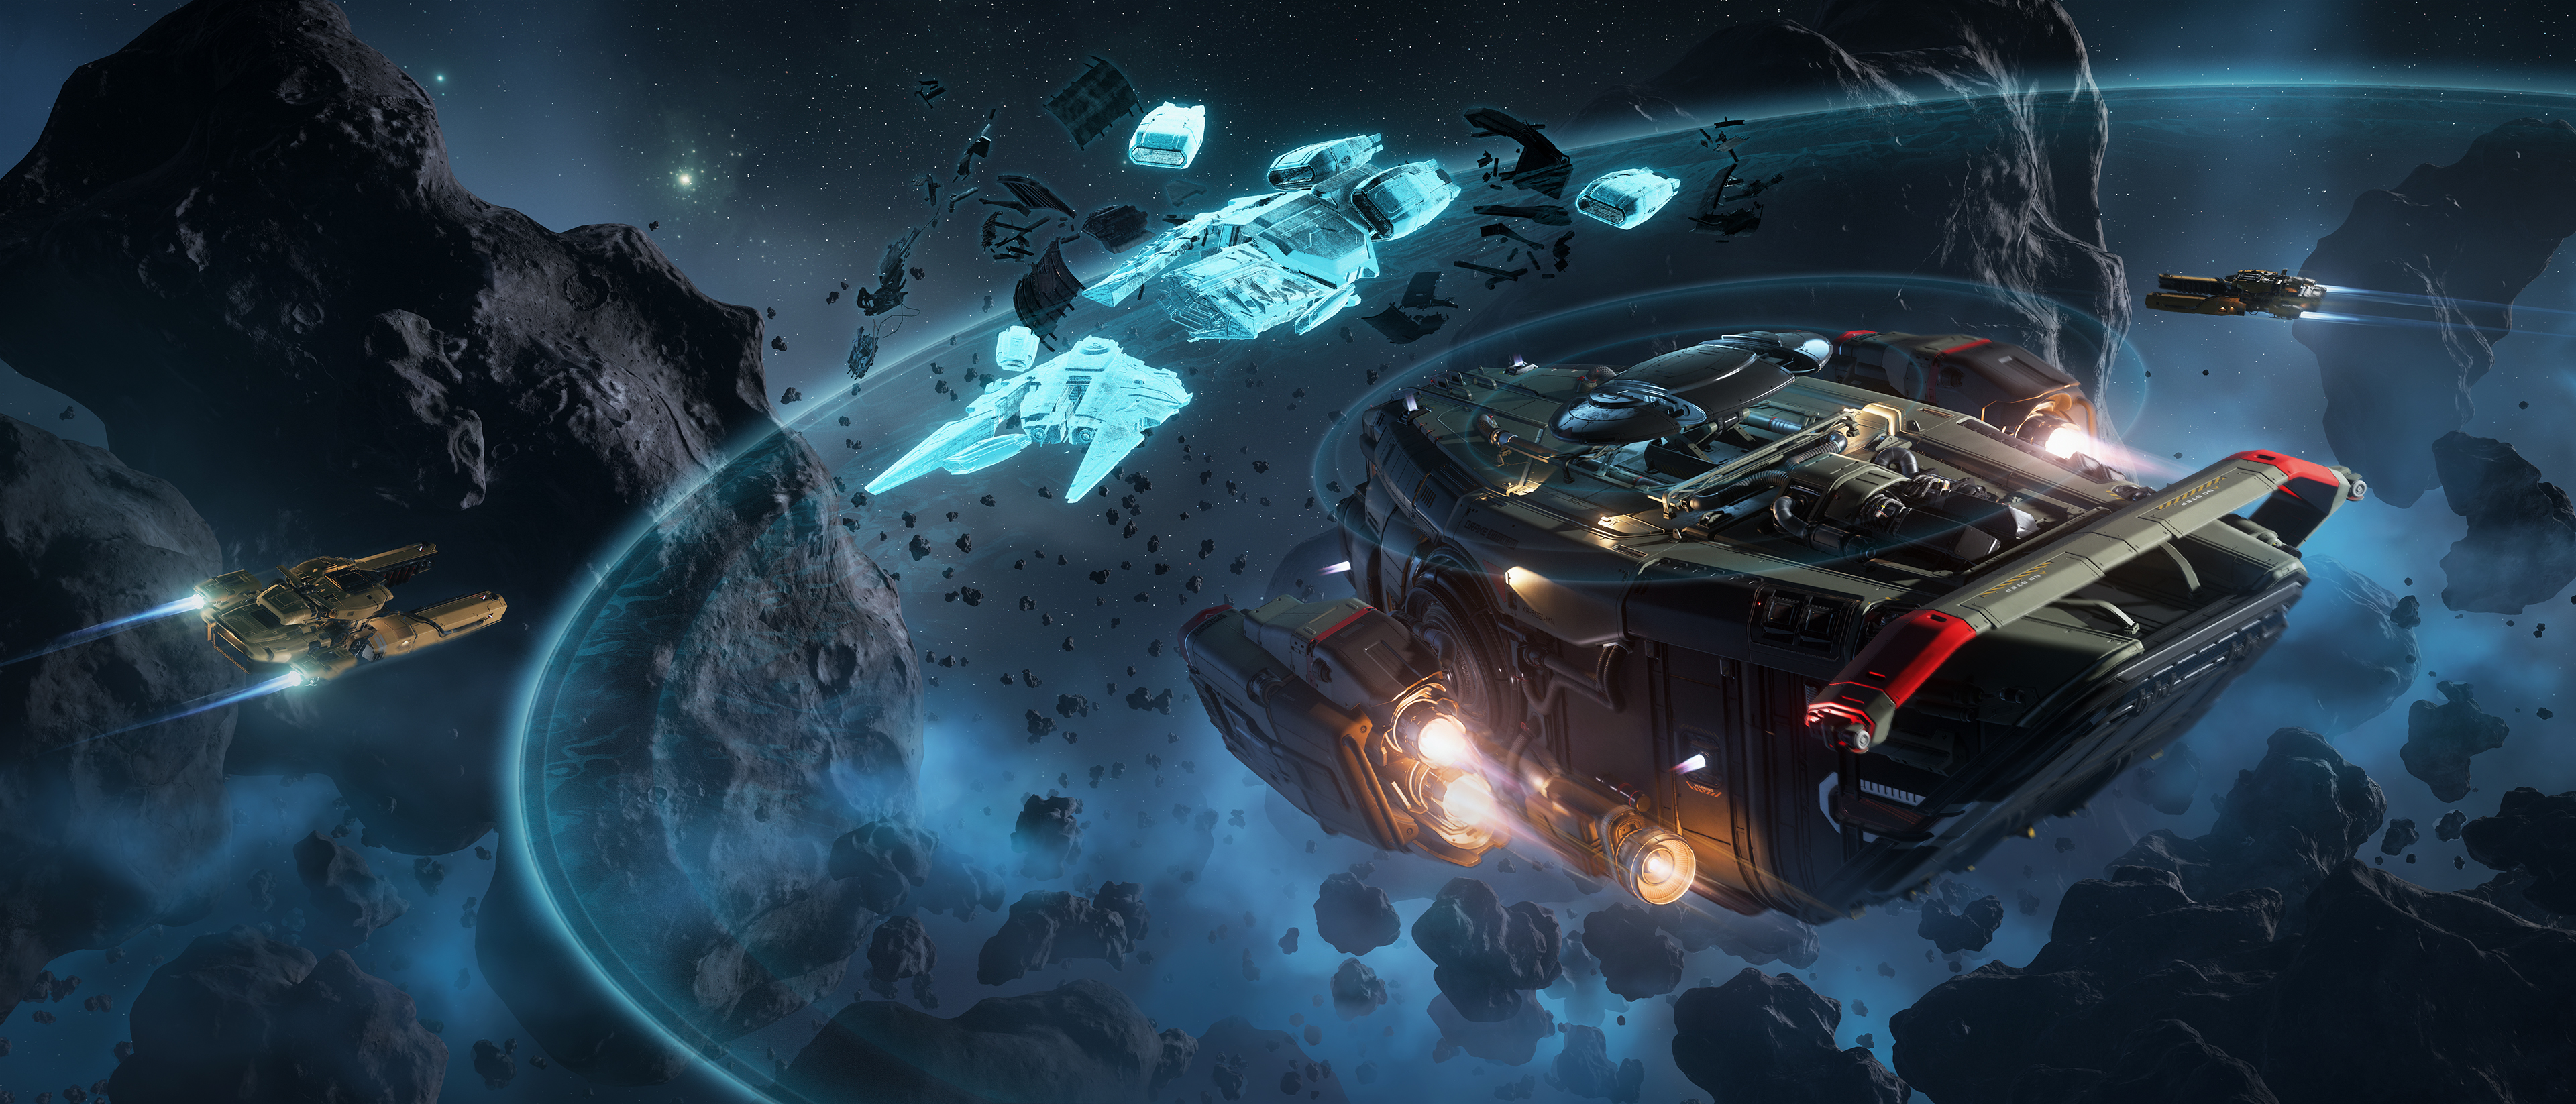 Star Citizen Alpha 3.21: Mission Ready is now available for download